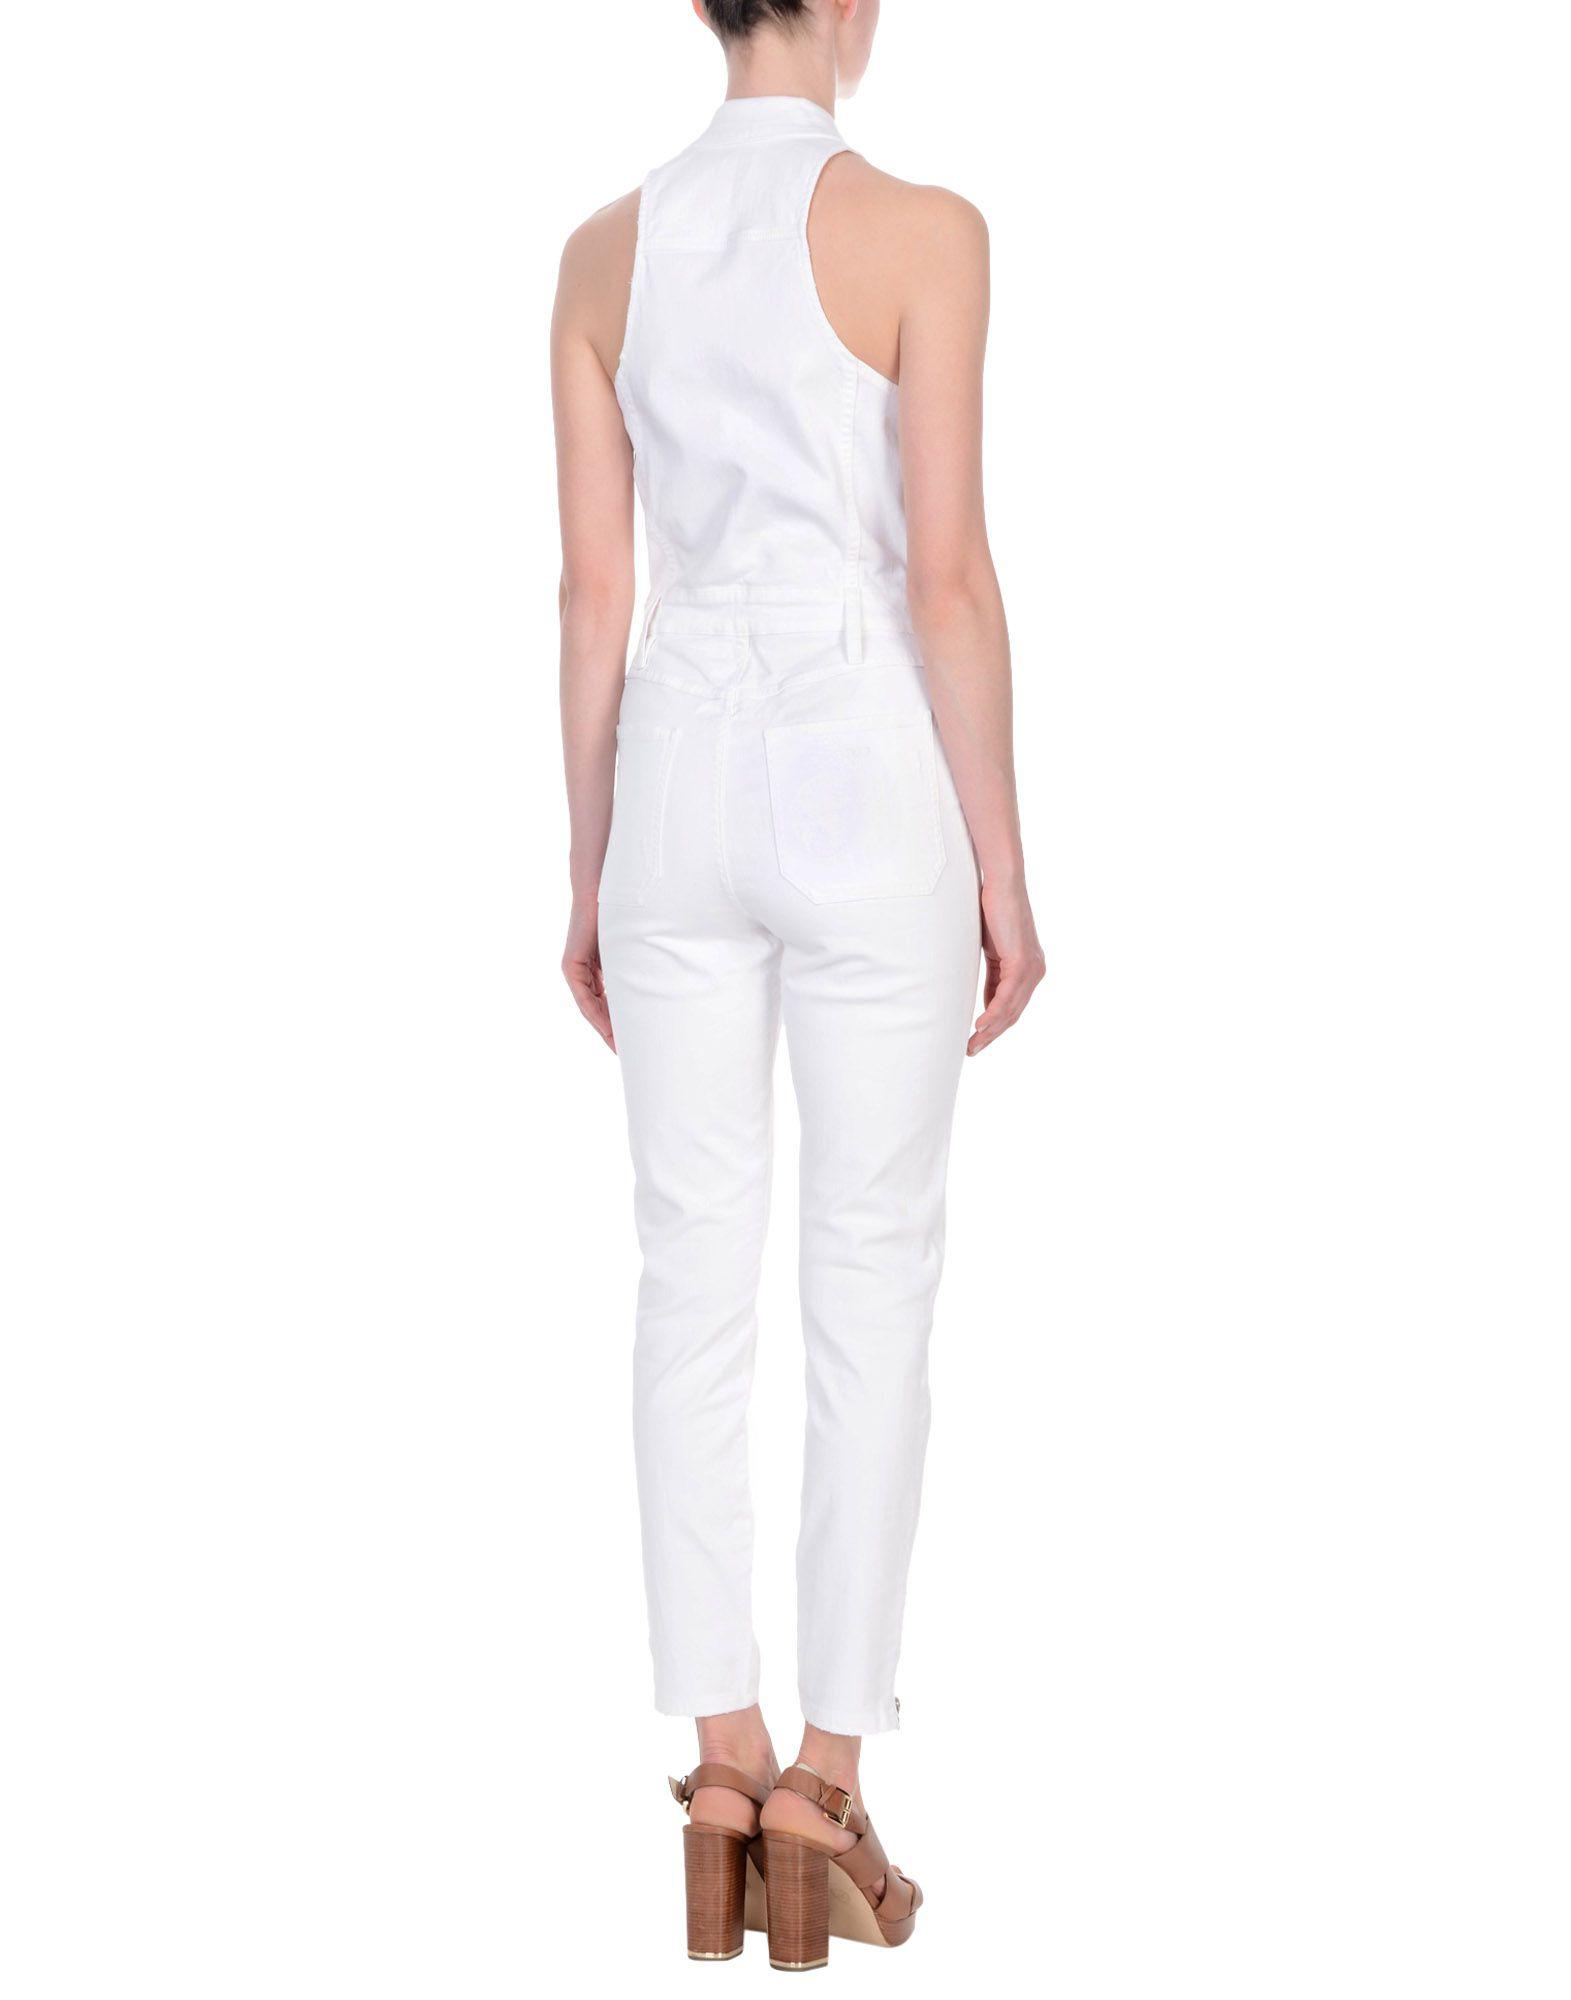 Guess Denim Jumpsuit in White - Lyst